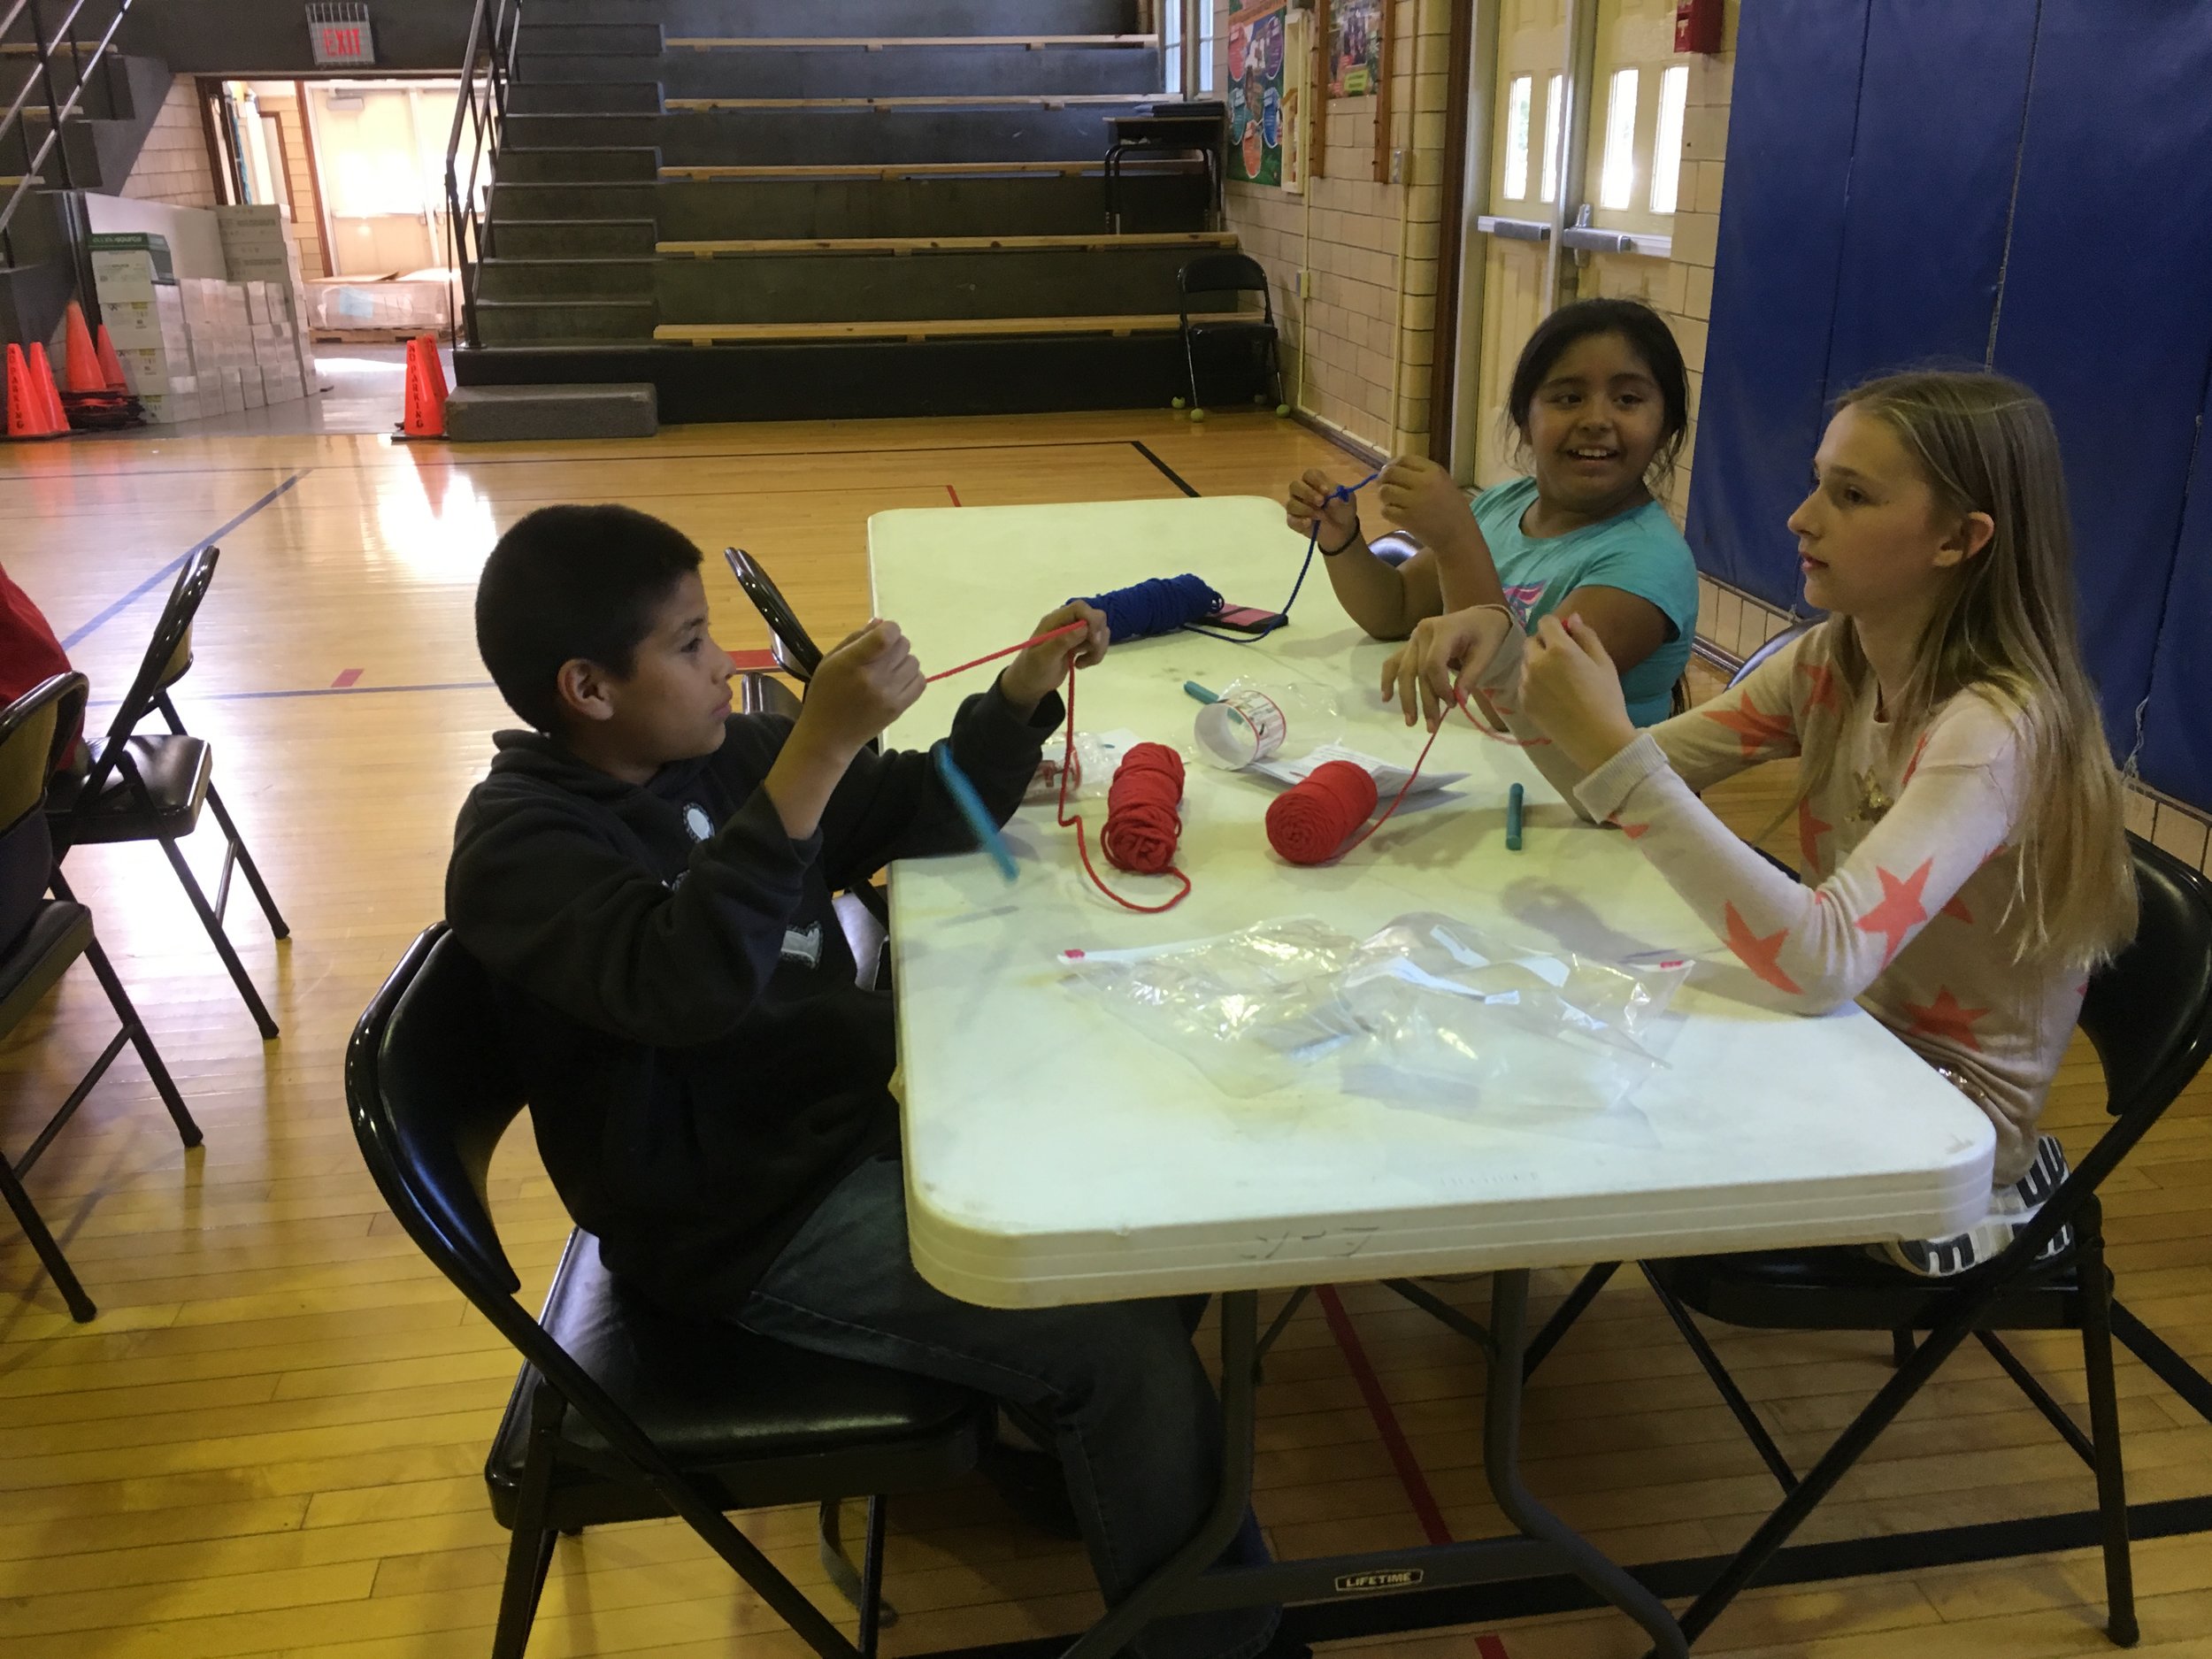 September Crochet-In at Longfellow Liberal Arts Elementary School (photo courtesy of Danielle Beliveau-Derion)